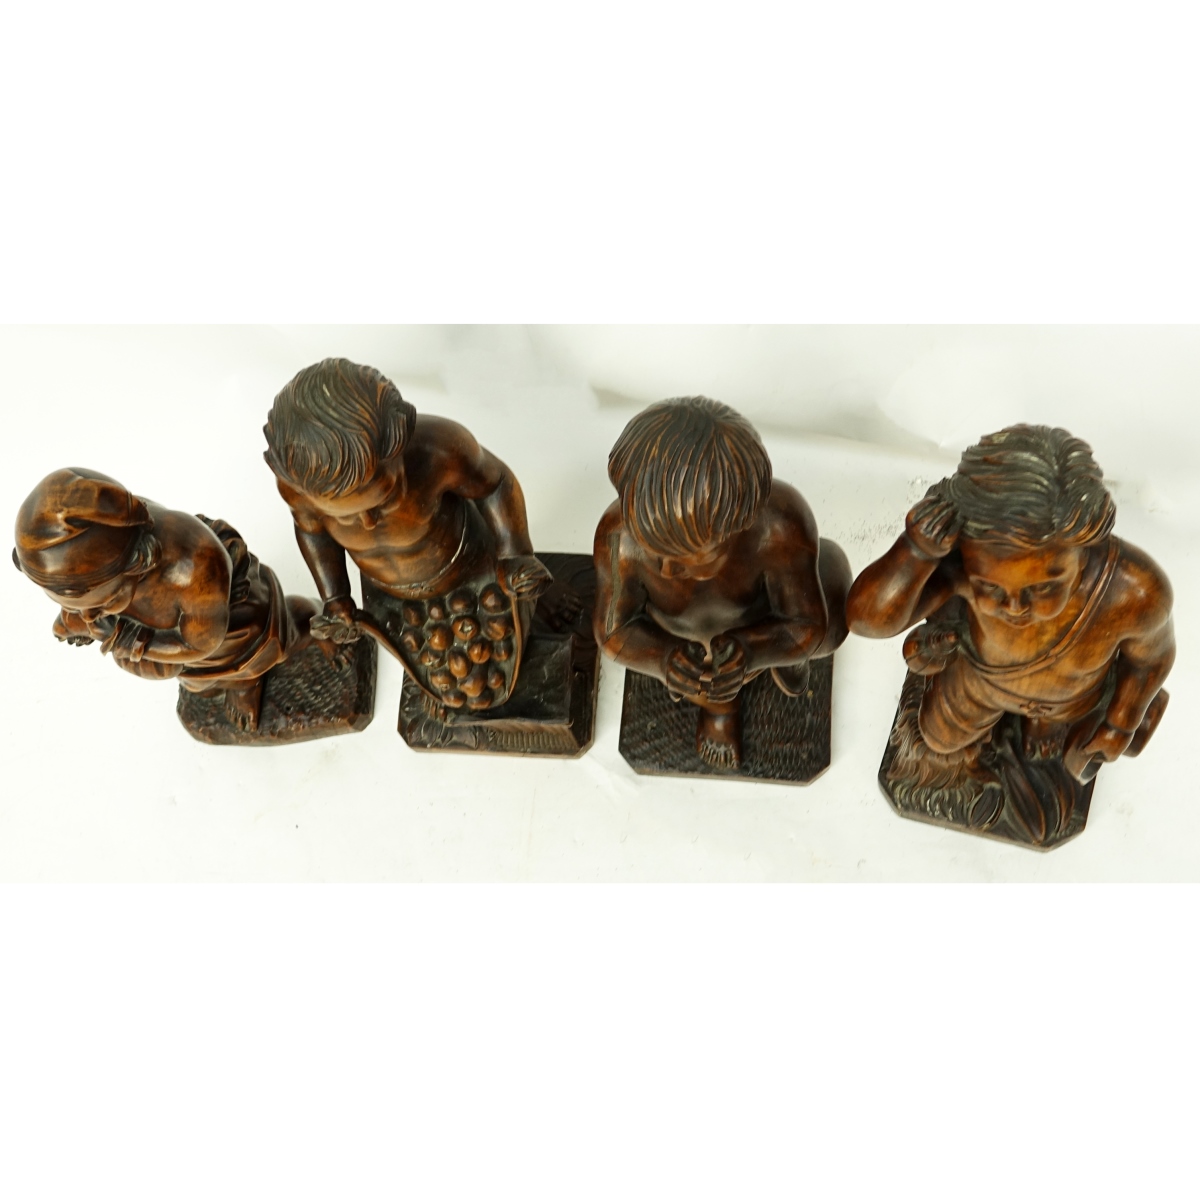 Four (4) Wood Carvings